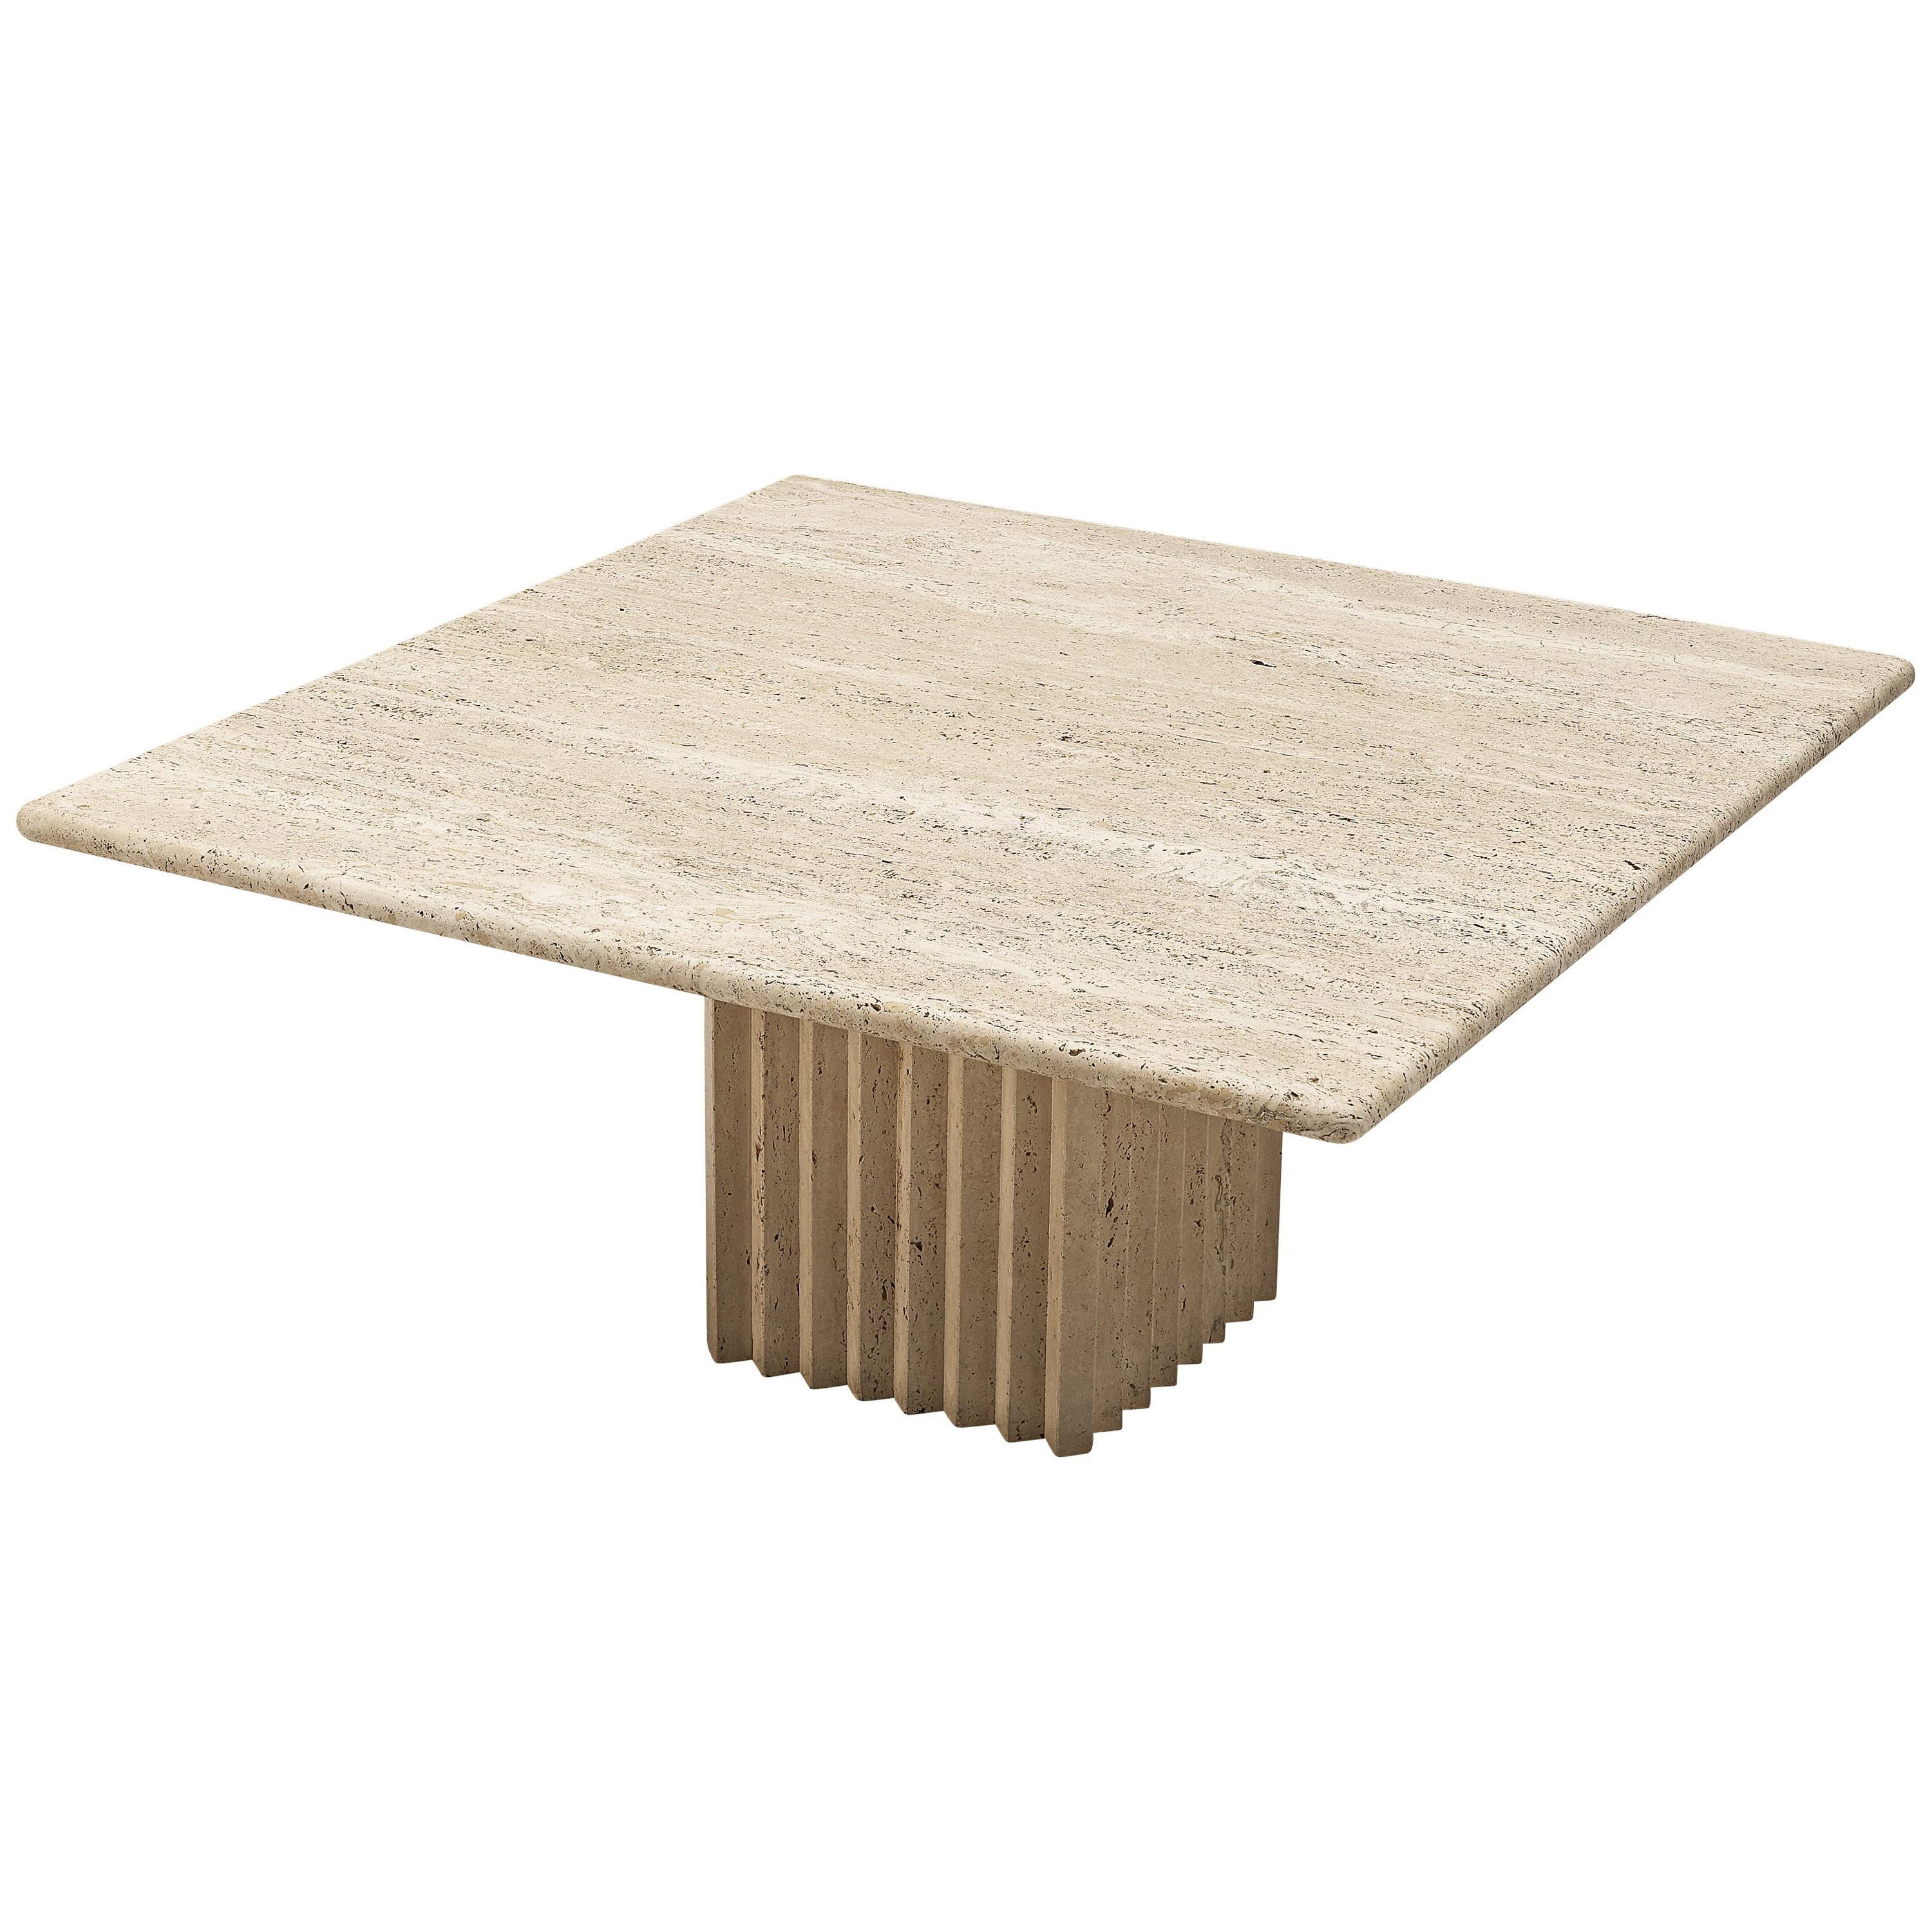 Sculptural Coffee Table in Travertine